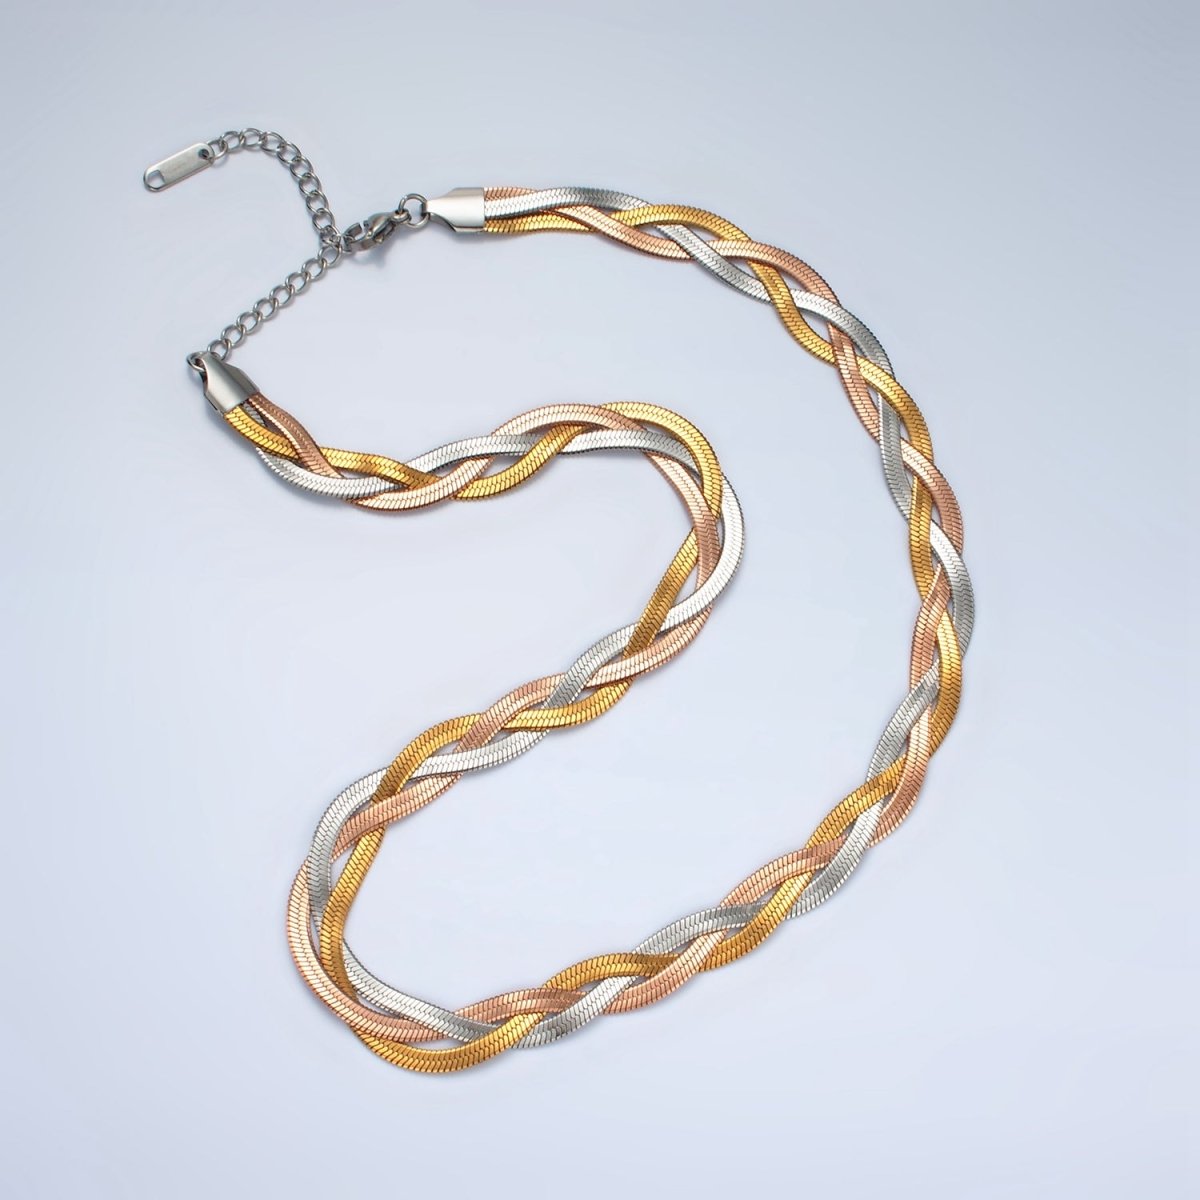 Stainless Steel 7.6mm Triple Herringbone Chain Necklace in Gold, Silver, Mixed Metal | WA - 2530 ~ WA - 2532 - DLUXCA